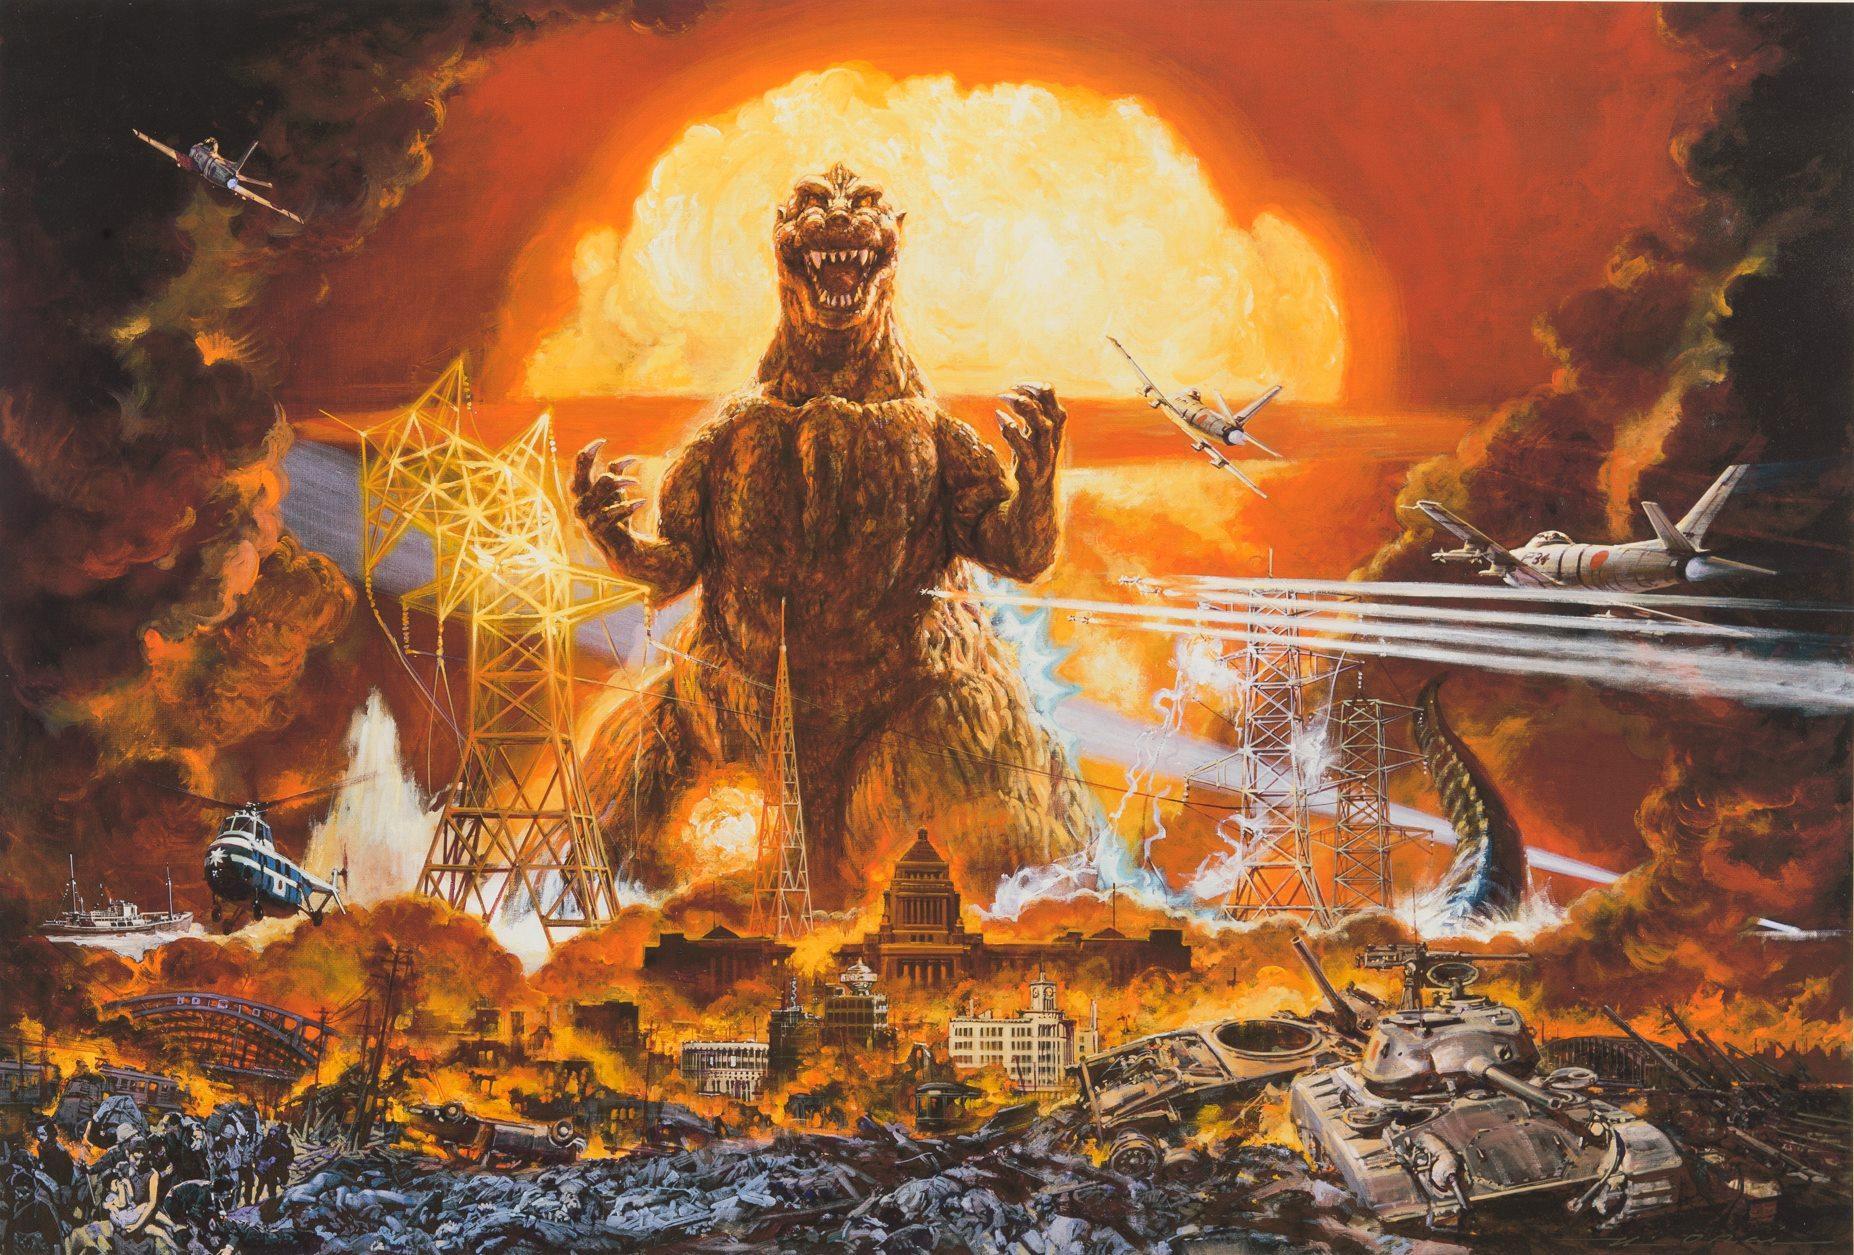 'Godzilla' Movies Of All Time Ranked